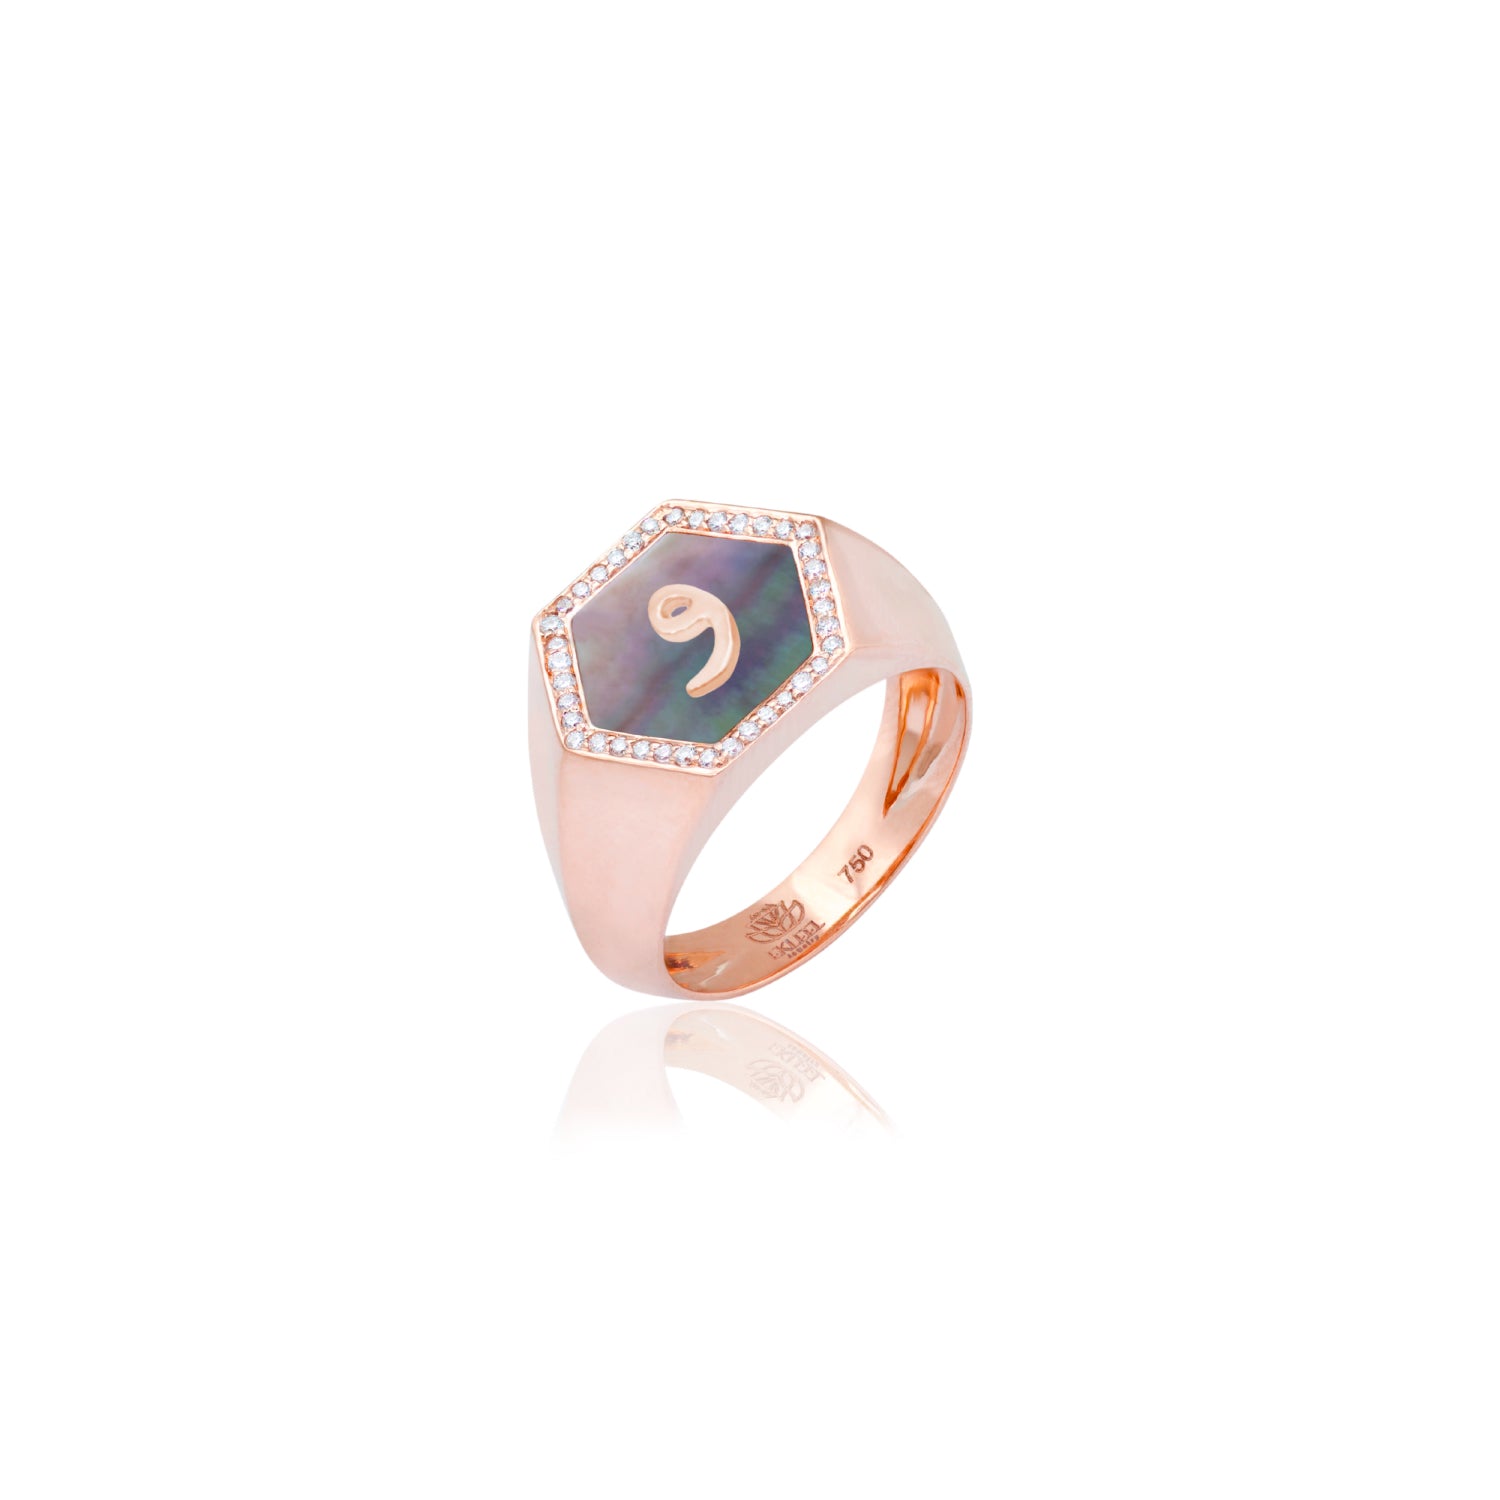 Qamoos 2.0 Letter و Black Mother of Pearl and Diamond Signet Ring in Rose Gold